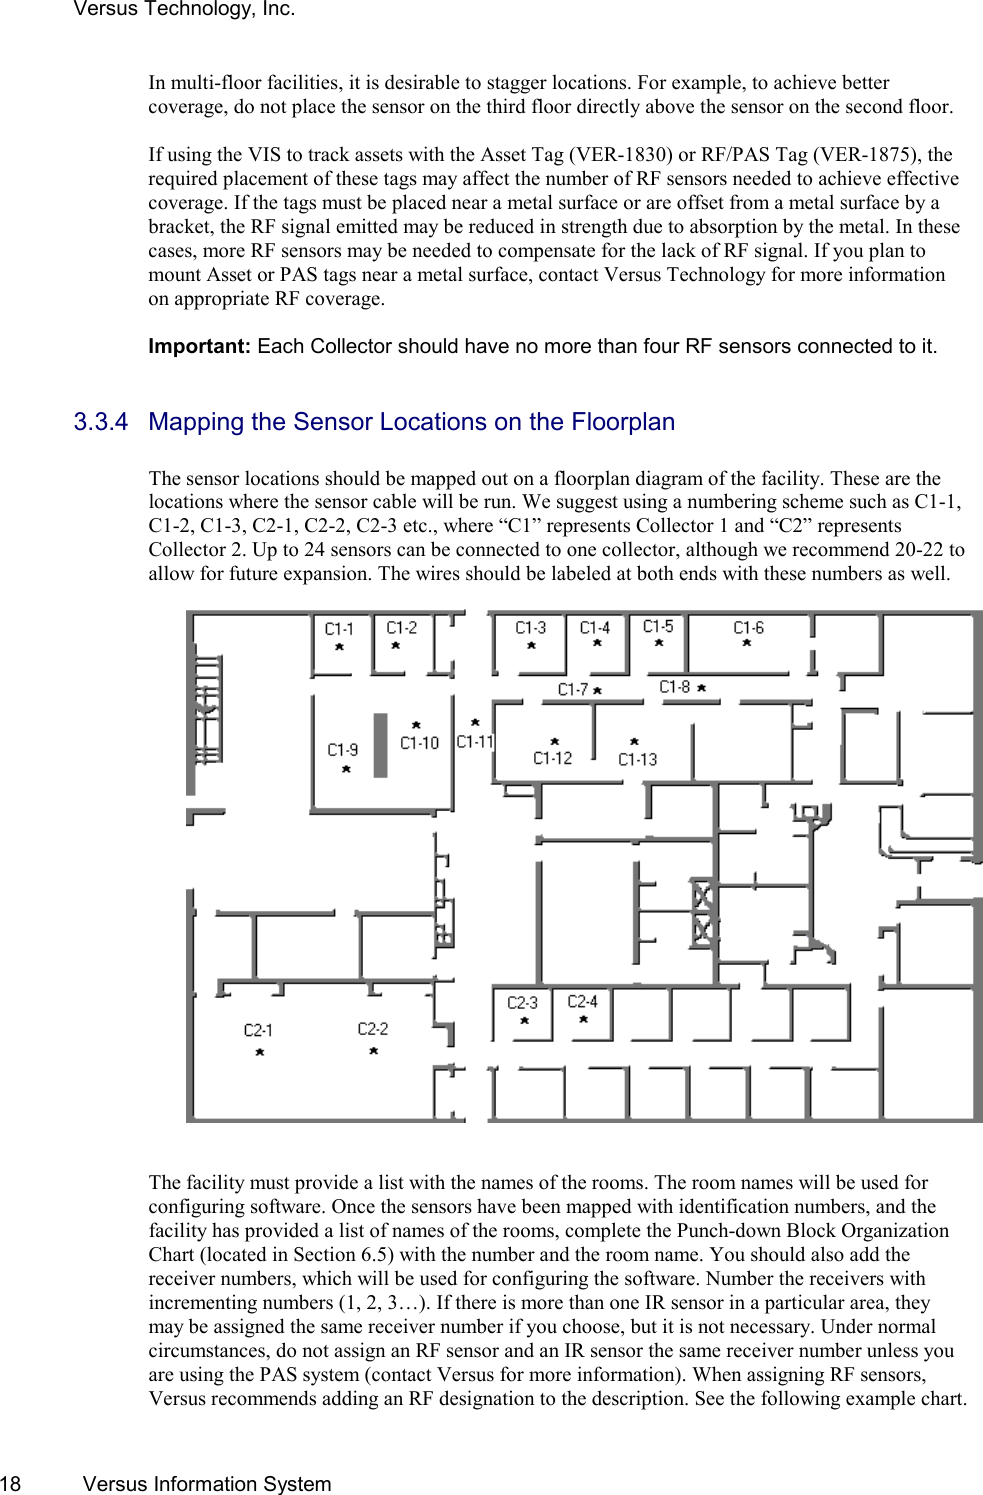 Versus Technology, Inc. 18  Versus Information System In multi-floor facilities, it is desirable to stagger locations. For example, to achieve better coverage, do not place the sensor on the third floor directly above the sensor on the second floor.  If using the VIS to track assets with the Asset Tag (VER-1830) or RF/PAS Tag (VER-1875), the required placement of these tags may affect the number of RF sensors needed to achieve effective coverage. If the tags must be placed near a metal surface or are offset from a metal surface by a bracket, the RF signal emitted may be reduced in strength due to absorption by the metal. In these cases, more RF sensors may be needed to compensate for the lack of RF signal. If you plan to mount Asset or PAS tags near a metal surface, contact Versus Technology for more information on appropriate RF coverage.  Important: Each Collector should have no more than four RF sensors connected to it.   3.3.4  Mapping the Sensor Locations on the Floorplan  The sensor locations should be mapped out on a floorplan diagram of the facility. These are the locations where the sensor cable will be run. We suggest using a numbering scheme such as C1-1, C1-2, C1-3, C2-1, C2-2, C2-3 etc., where “C1” represents Collector 1 and “C2” represents Collector 2. Up to 24 sensors can be connected to one collector, although we recommend 20-22 to allow for future expansion. The wires should be labeled at both ends with these numbers as well.       The facility must provide a list with the names of the rooms. The room names will be used for configuring software. Once the sensors have been mapped with identification numbers, and the facility has provided a list of names of the rooms, complete the Punch-down Block Organization Chart (located in Section 6.5) with the number and the room name. You should also add the receiver numbers, which will be used for configuring the software. Number the receivers with incrementing numbers (1, 2, 3…). If there is more than one IR sensor in a particular area, they may be assigned the same receiver number if you choose, but it is not necessary. Under normal circumstances, do not assign an RF sensor and an IR sensor the same receiver number unless you are using the PAS system (contact Versus for more information). When assigning RF sensors, Versus recommends adding an RF designation to the description. See the following example chart. 